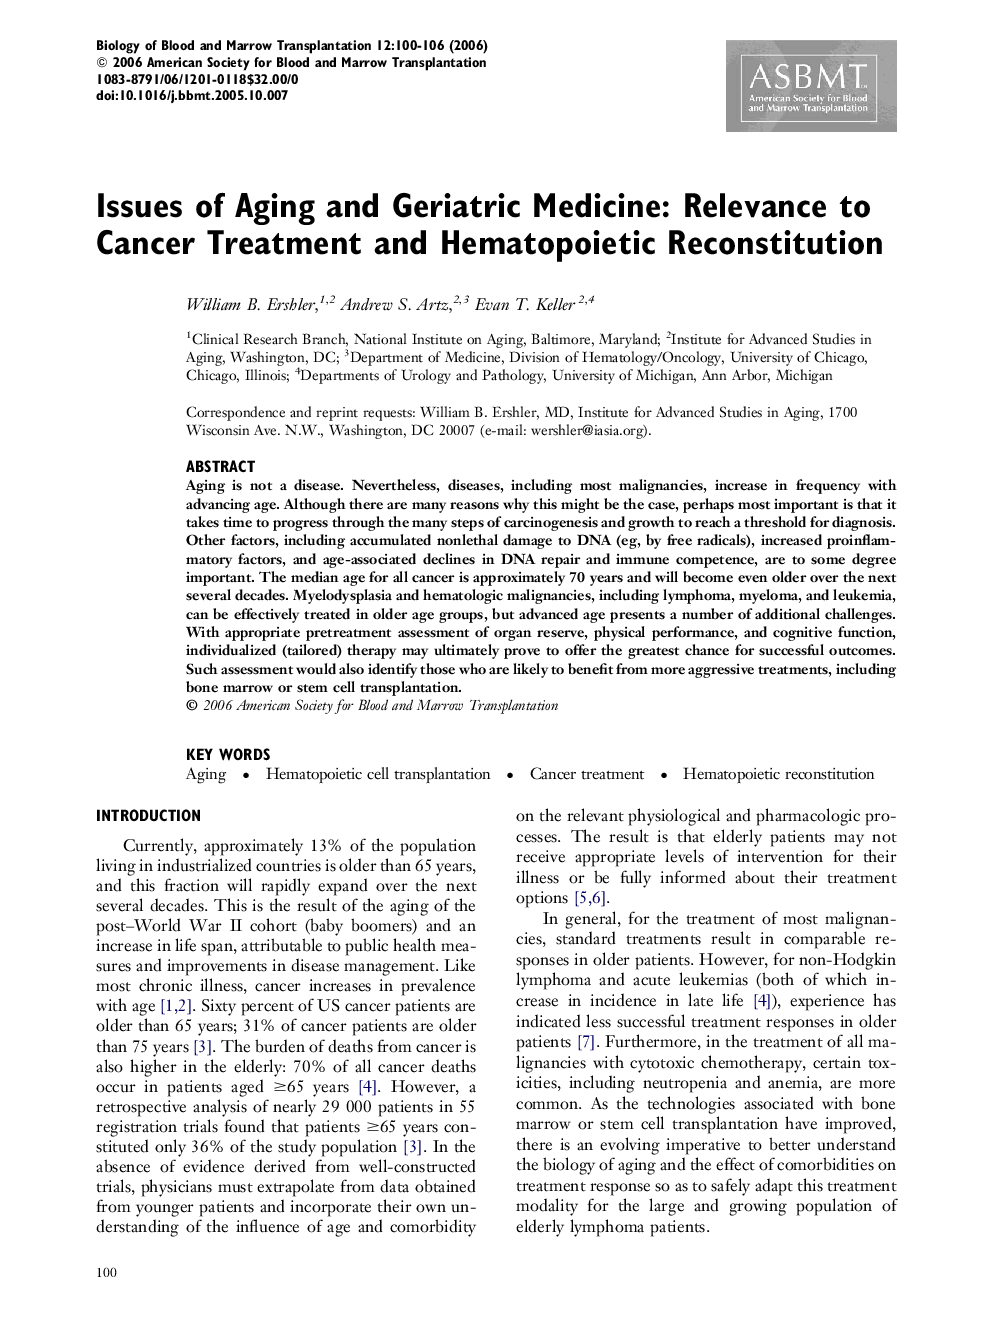 Issues of Aging and Geriatric Medicine: Relevance to Cancer Treatment and Hematopoietic Reconstitution